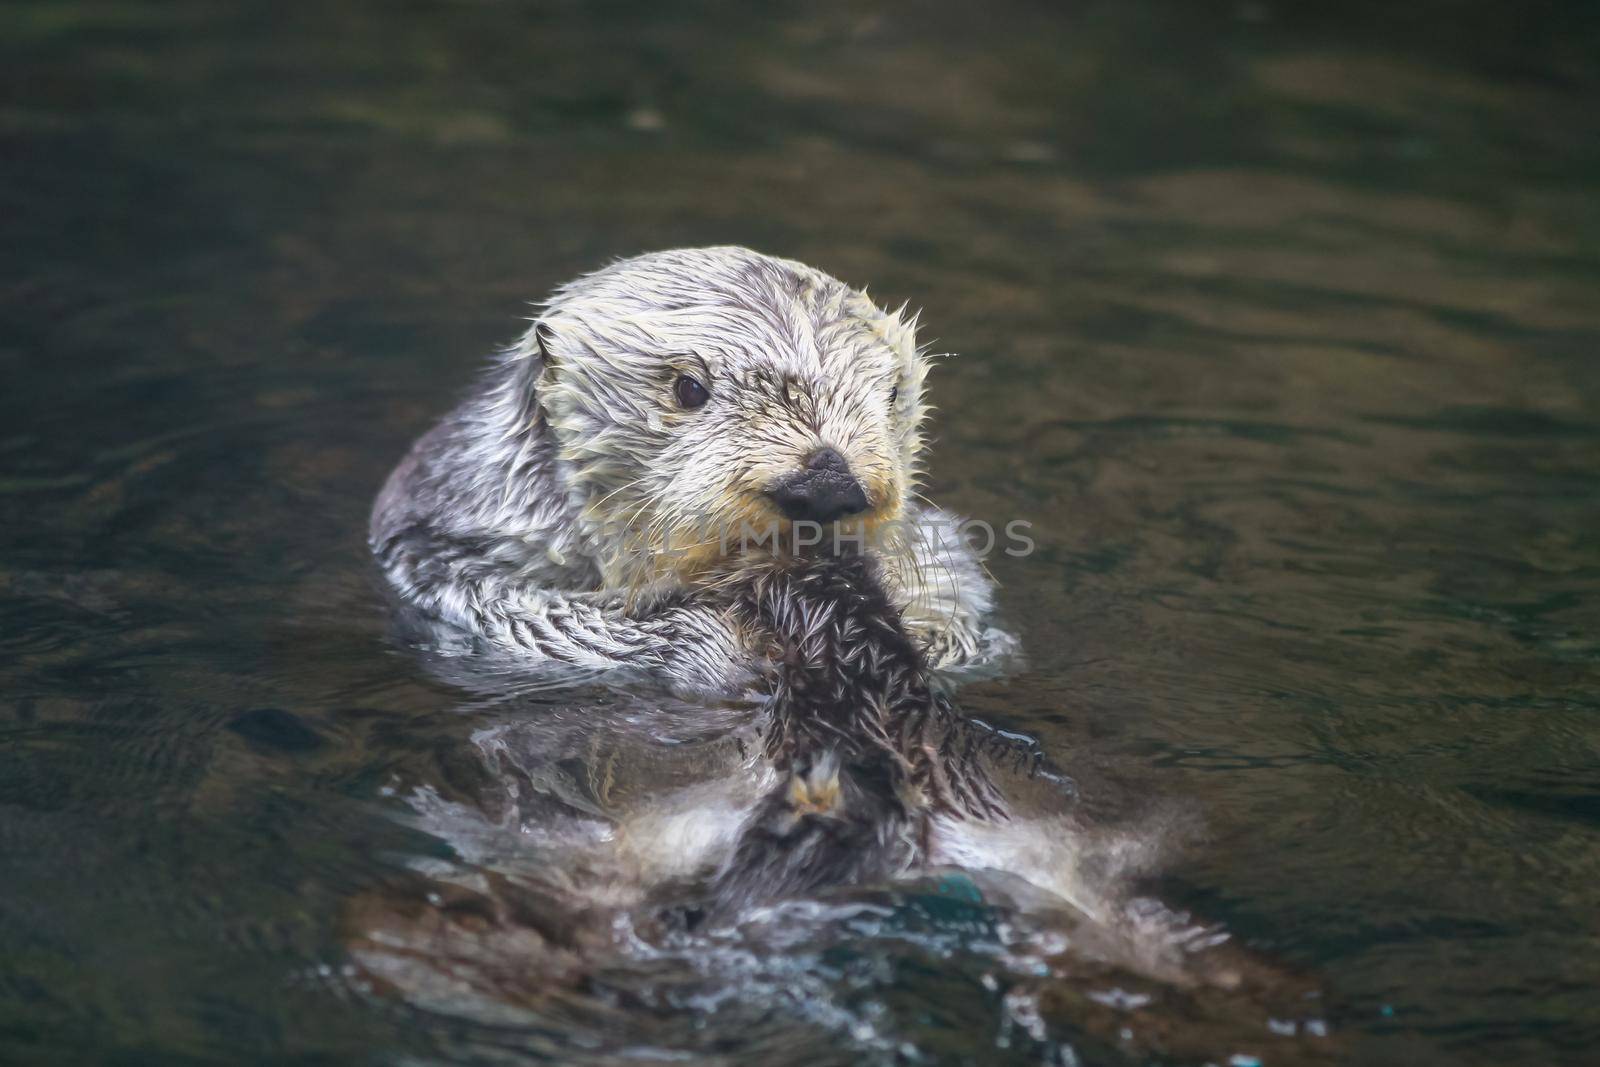 A sea otter enjoys leisure time in water.